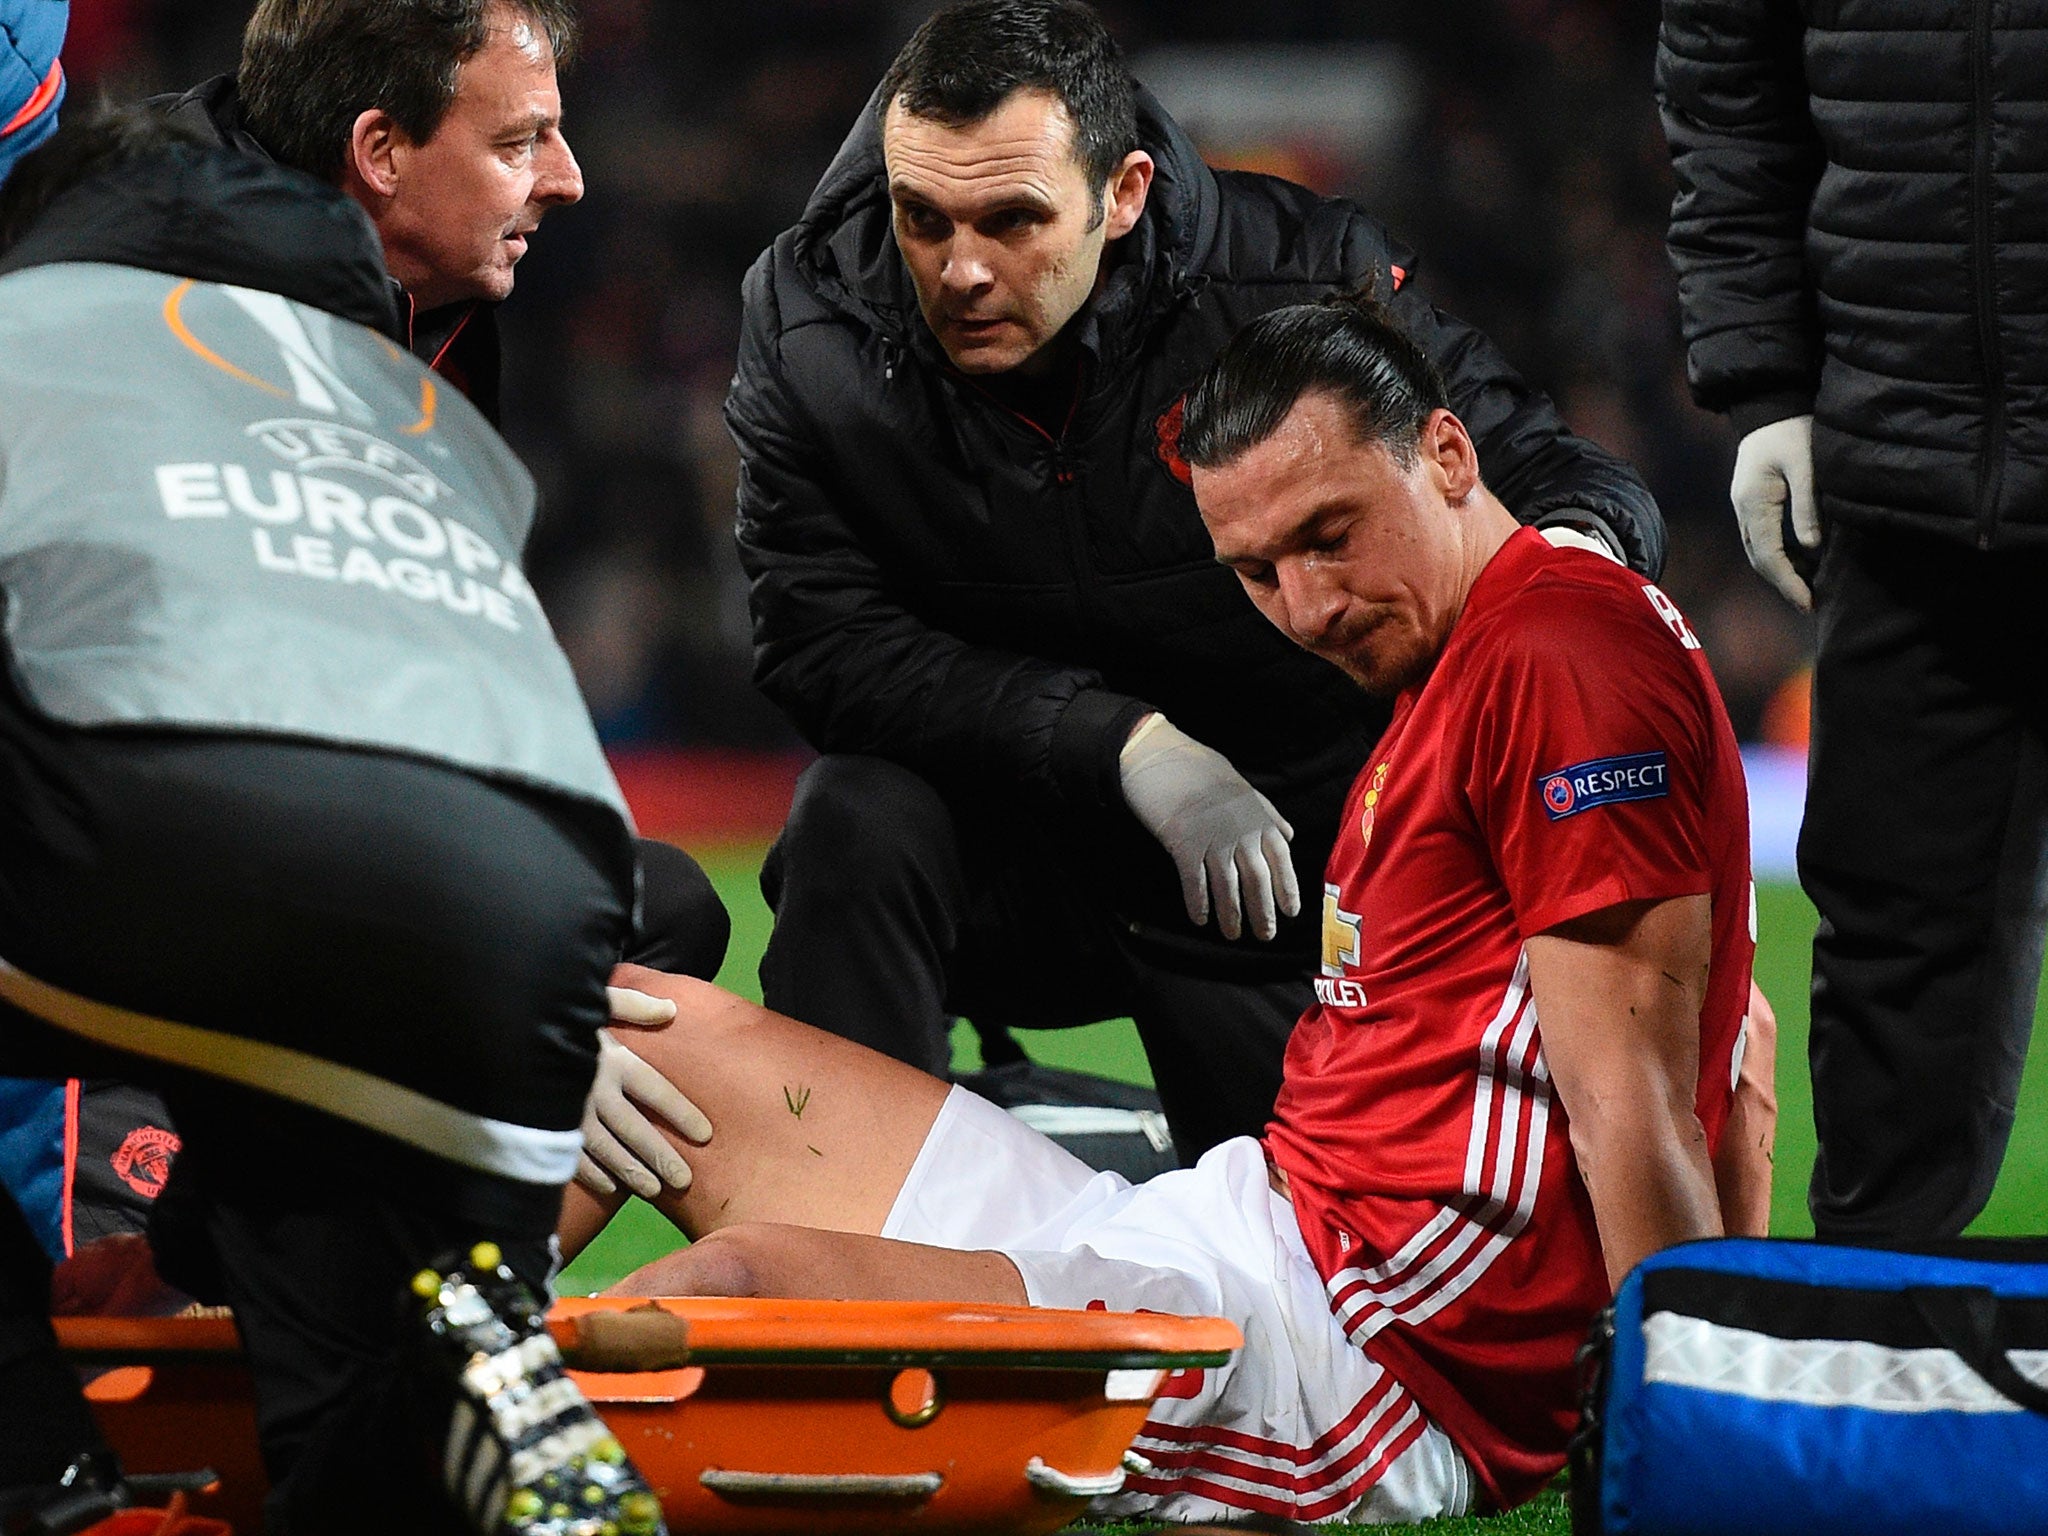 Ibrahimovic picked up the injury against Anderlecht in the Europa League